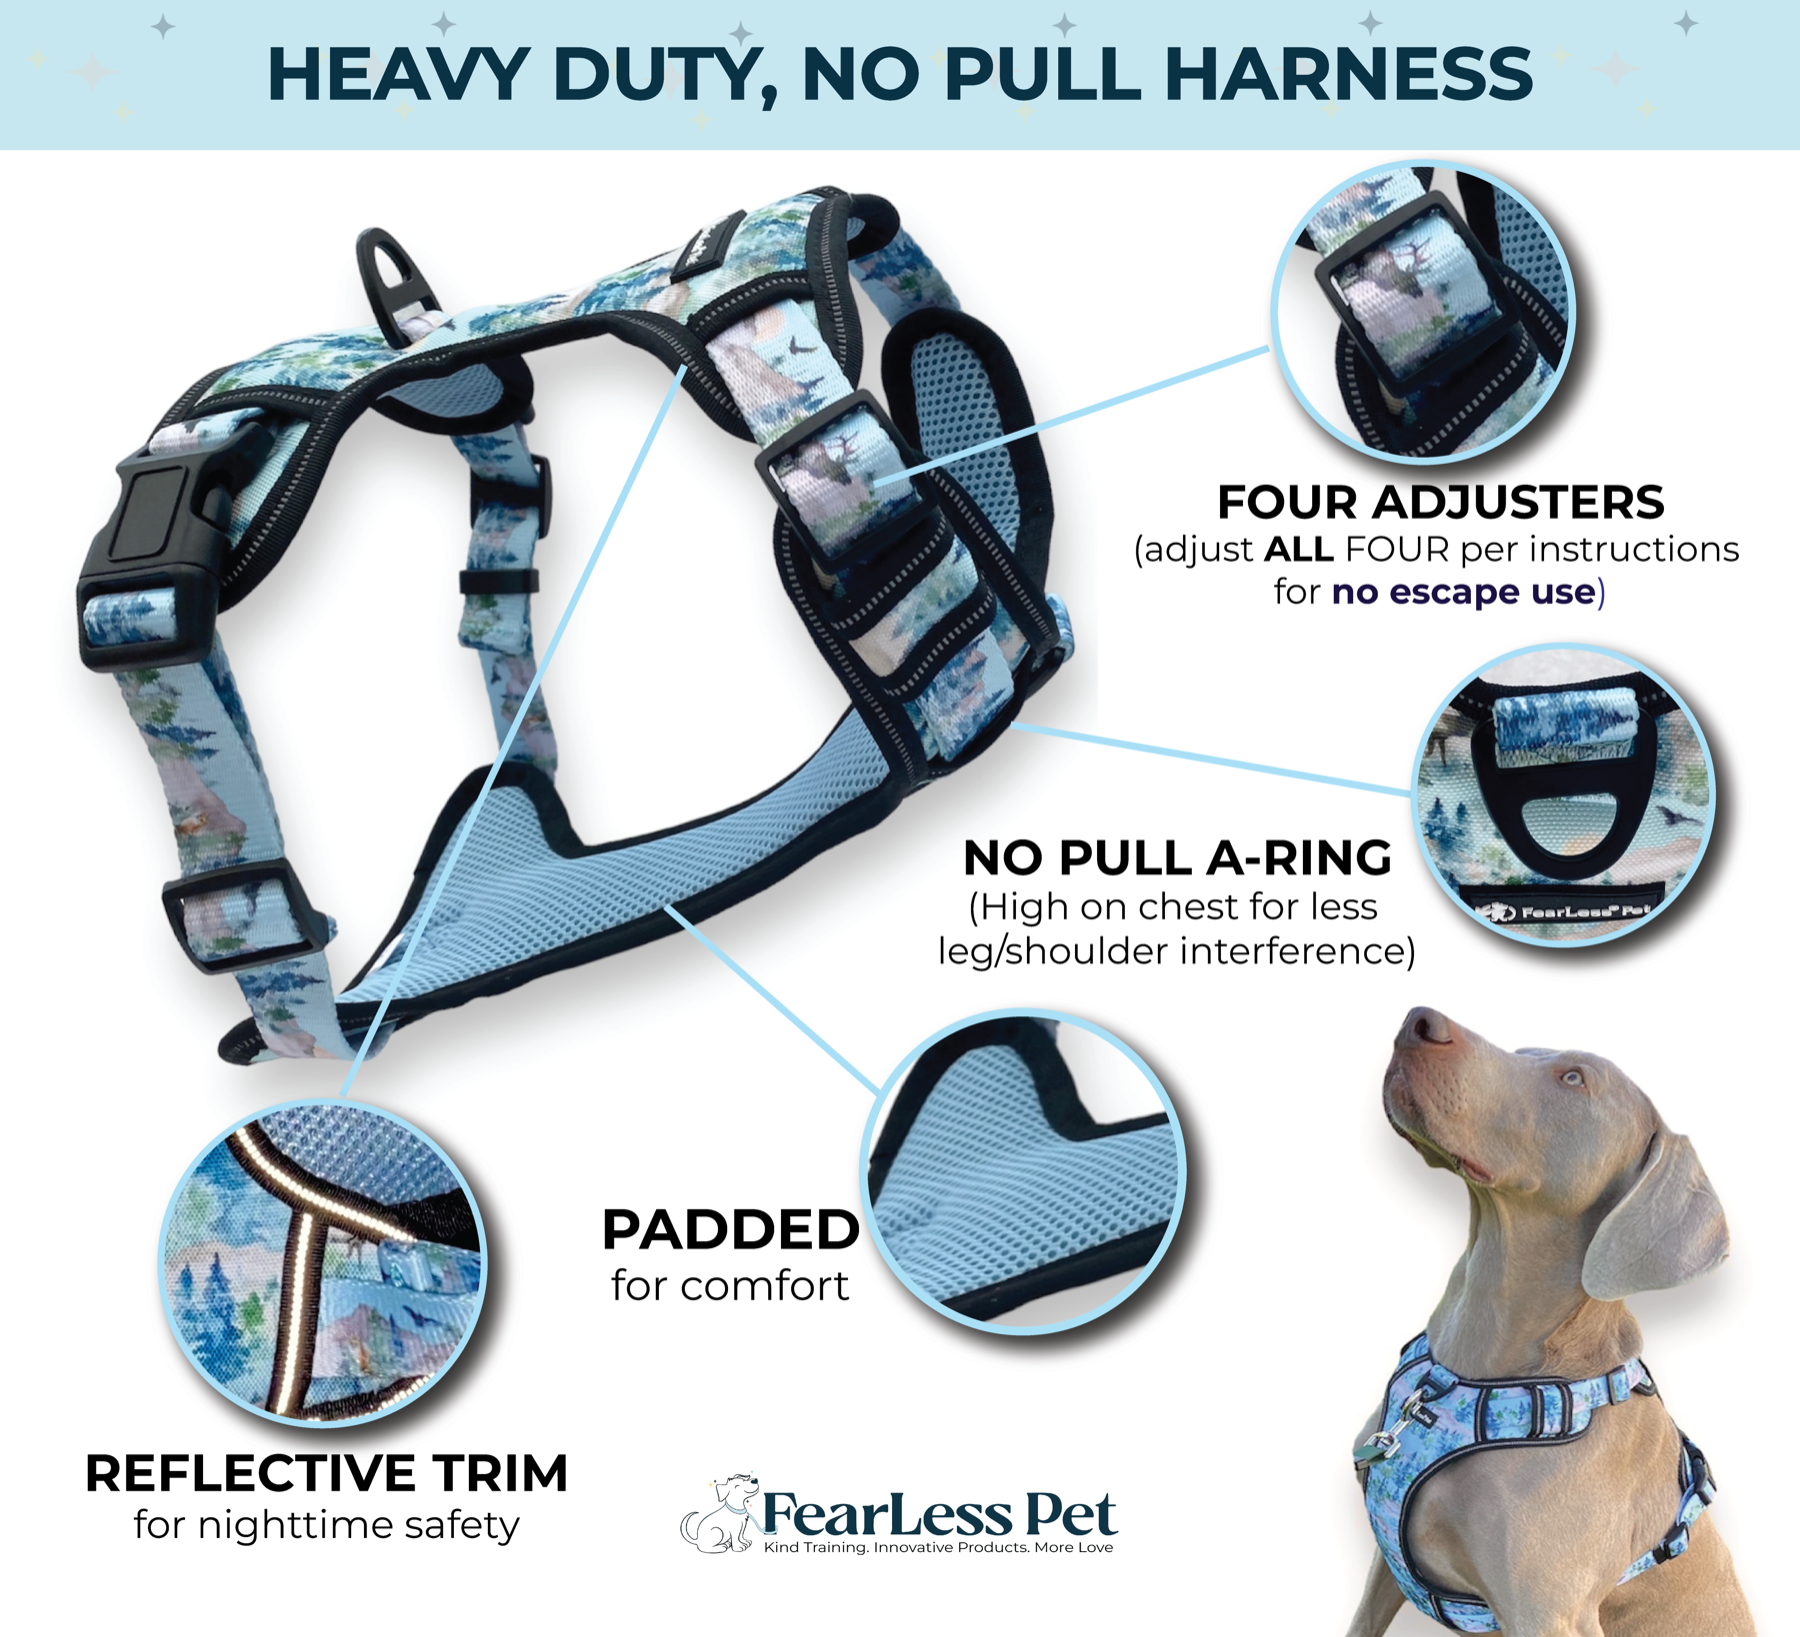 an infographic showing the features of a no pull dog harness that is also an escape proof dog harness by fearless pet